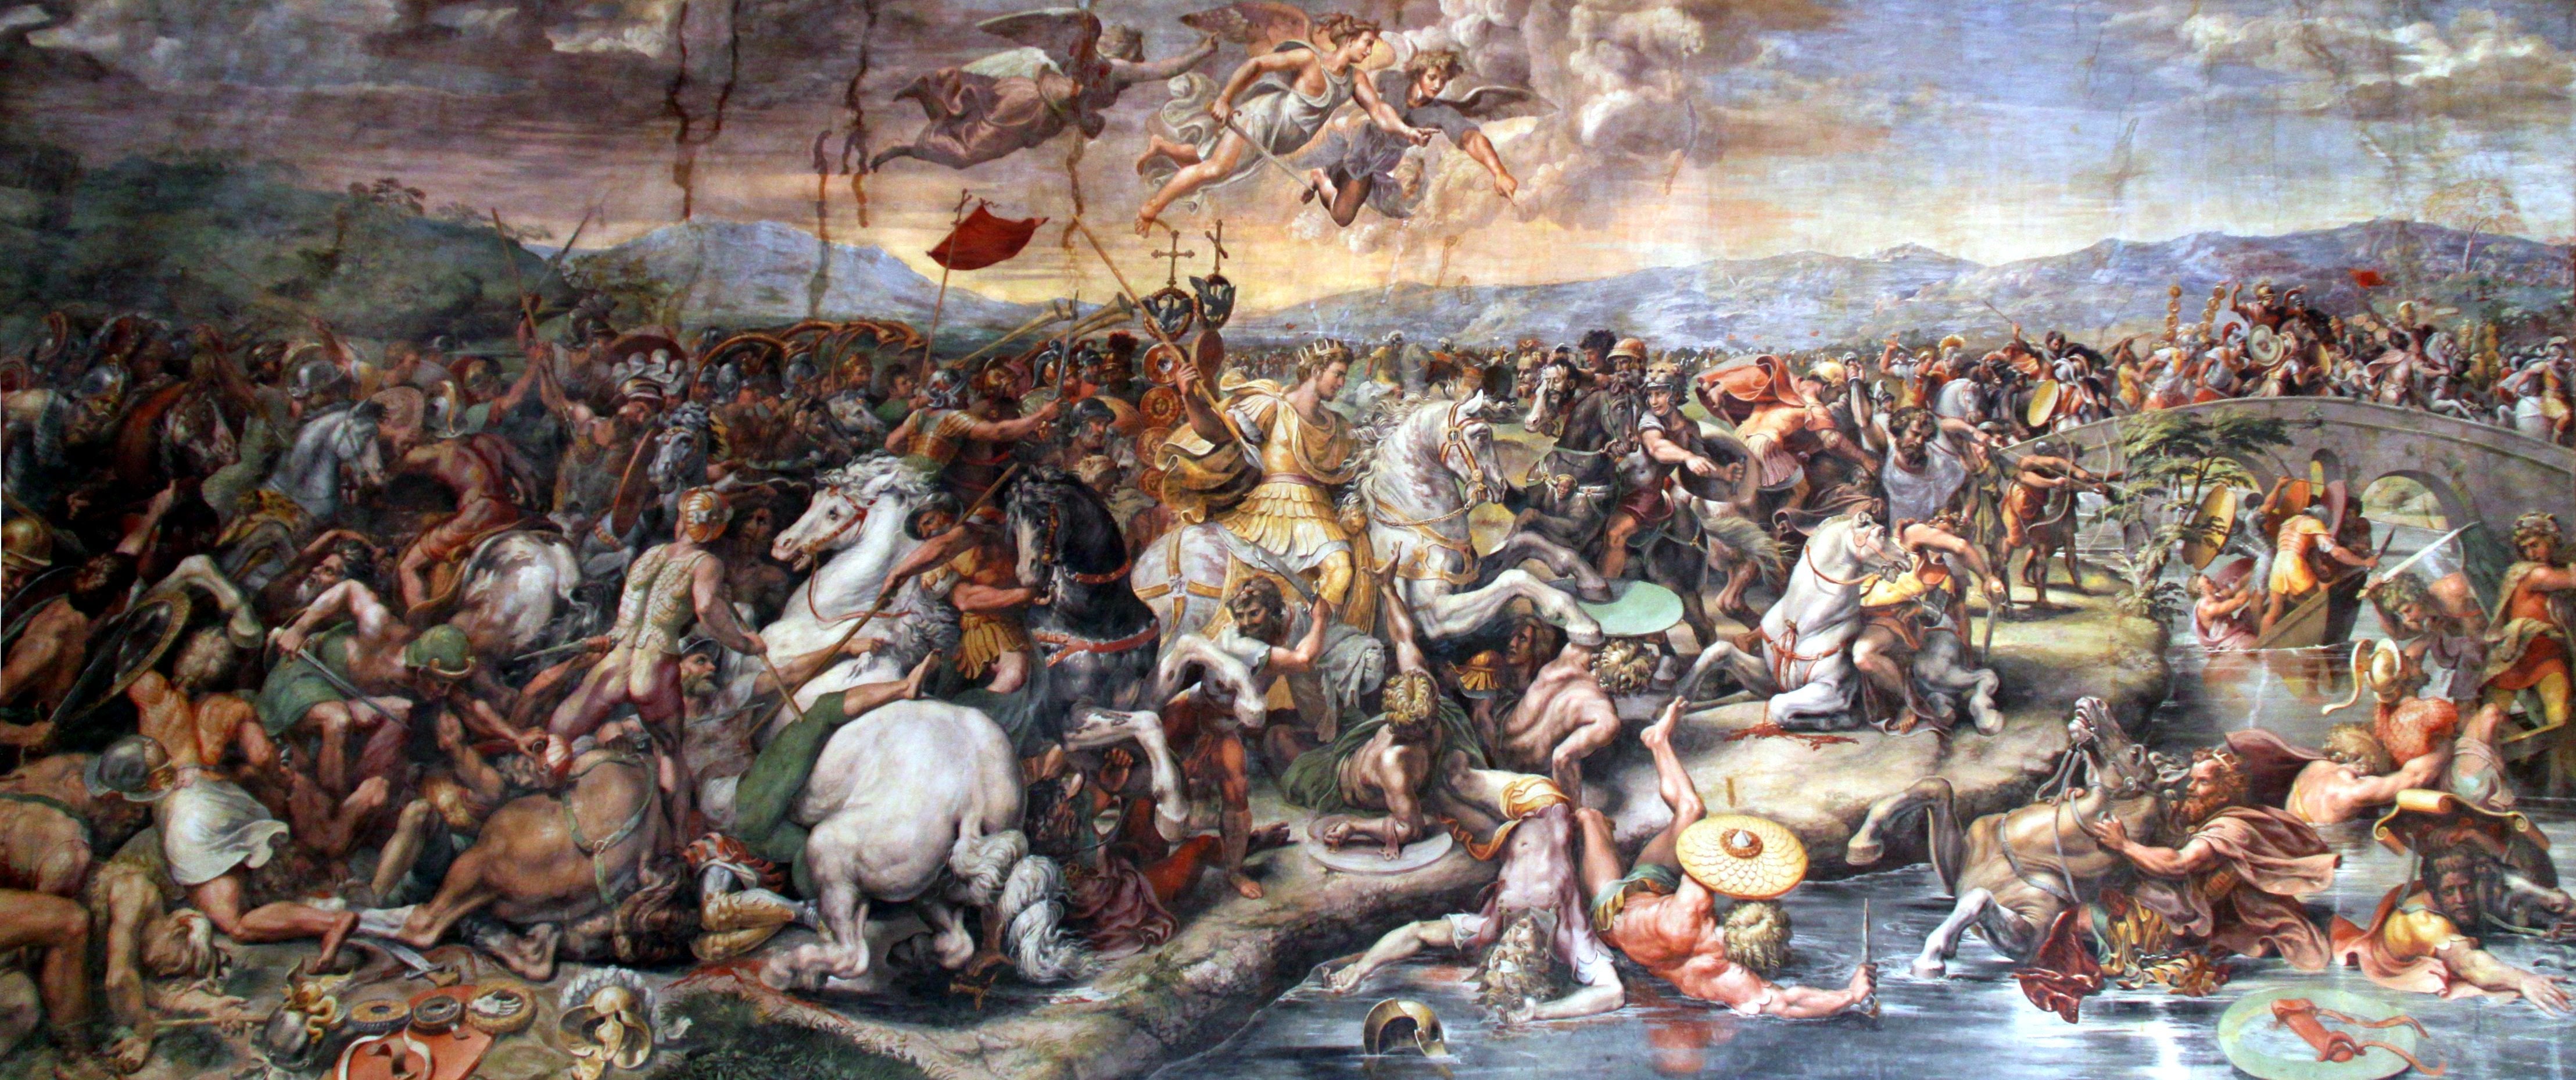 A 16th-century portrayal of the Battle of the Milvian Bridge of AD312 – one of the most important military events in world history